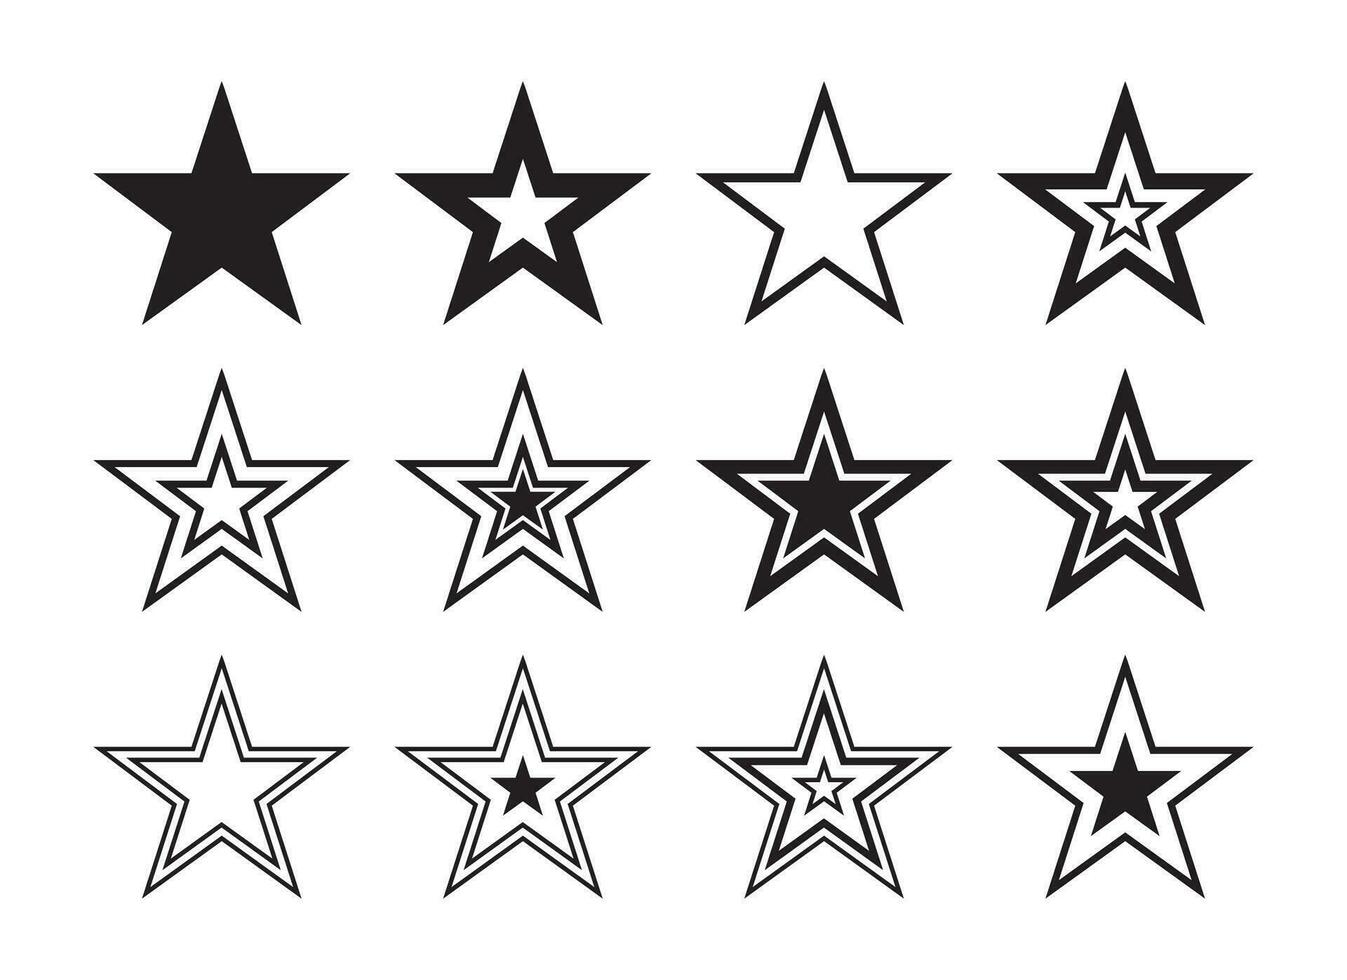 Star Shape Outline Graphic Silhouette Set vector